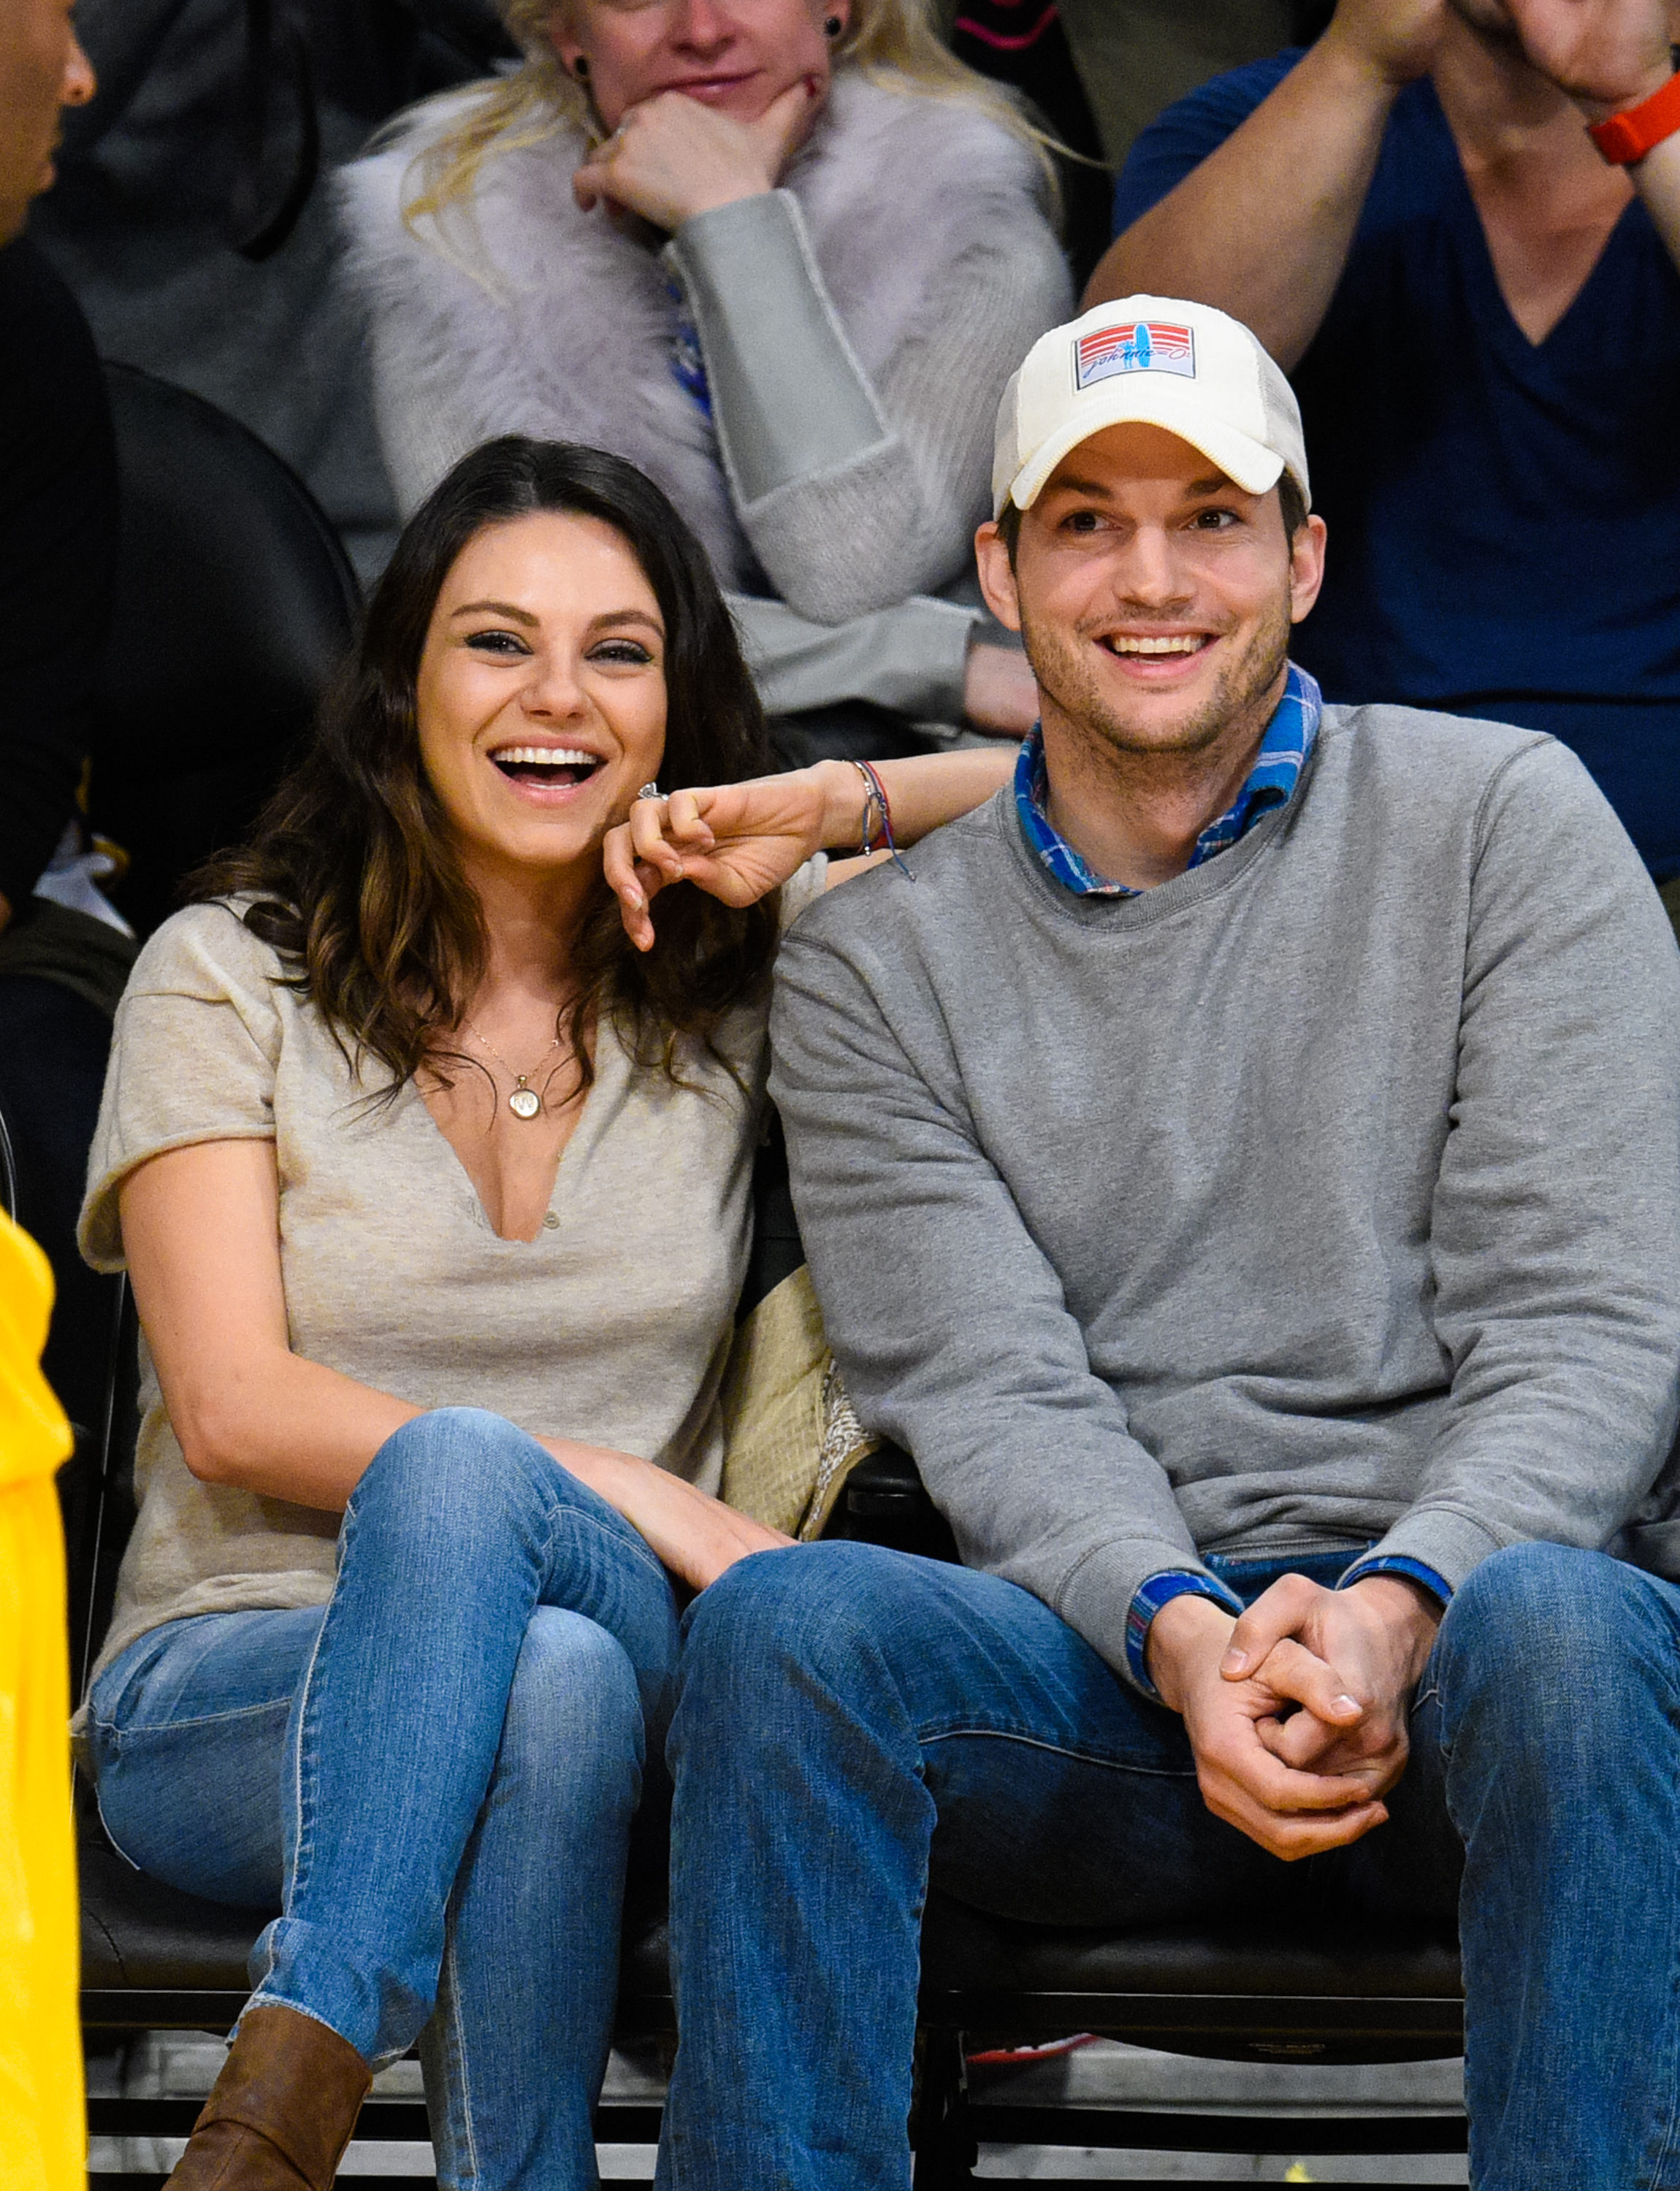 Mila Kunis (L) and Ashton Kutcher attend a basketball game between the Oklahoma City Thunder and the Los Angeles Lakers at Staples Center on December 19, 2014 in Los Angeles, California. (Noel Vasquez&mdash;GC Images/Getty Images)